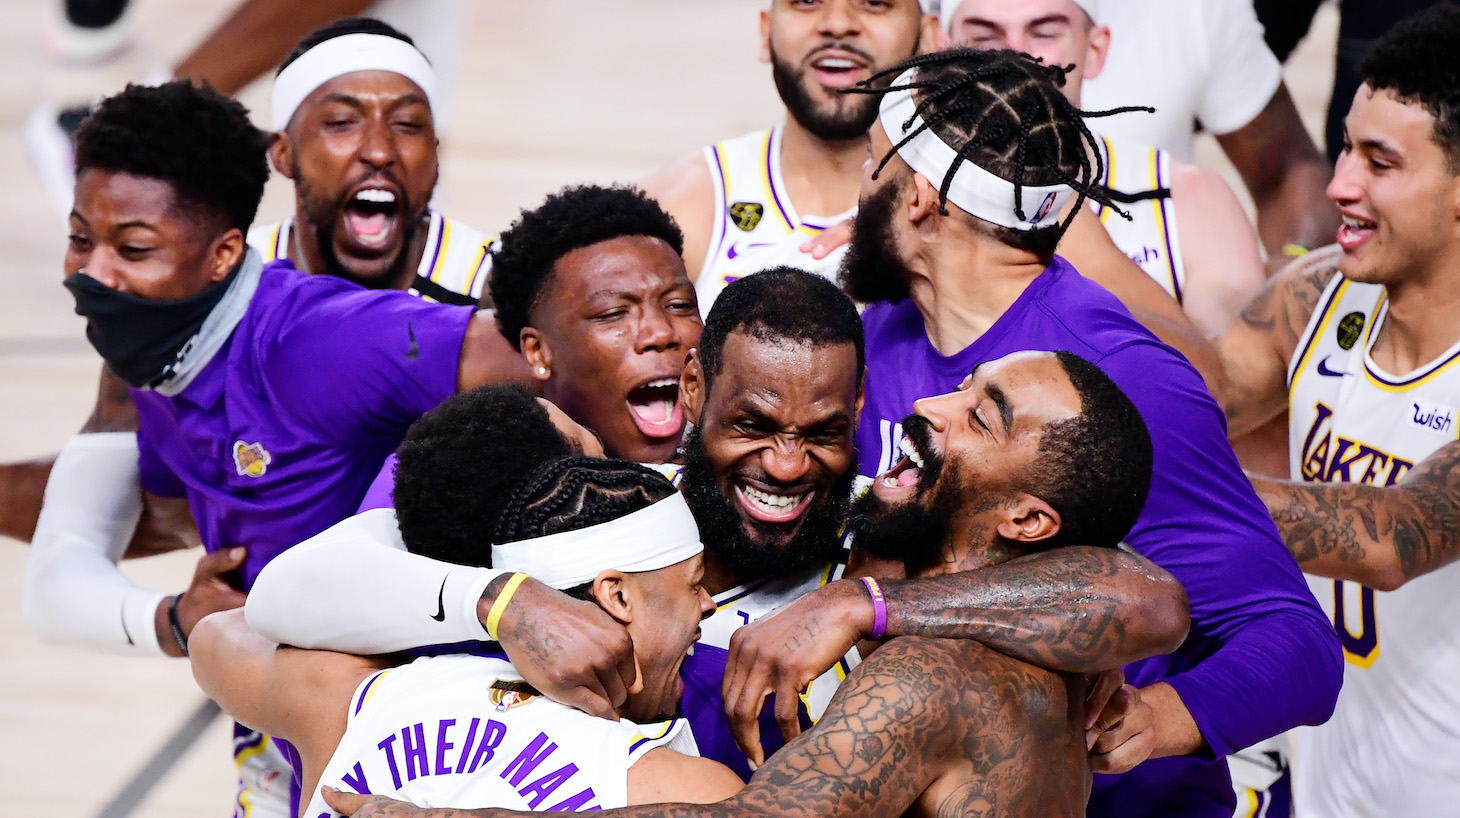 LAKE BUENA VISTA, FLORIDA - OCTOBER 11: LeBron James #23 of the Los Angeles Lakers celebrates with Quinn Cook #28 of the Los Angeles Lakers and teammates after winning the 2020 NBA Championship in Game Six of the 2020 NBA Finals at AdventHealth Arena at the ESPN Wide World Of Sports Complex on October 11, 2020 in Lake Buena Vista, Florida. NOTE TO USER: User expressly acknowledges and agrees that, by downloading and or using this photograph, User is consenting to the terms and conditions of the Getty Images License Agreement. (Photo by Douglas P. DeFelice/Getty Images)